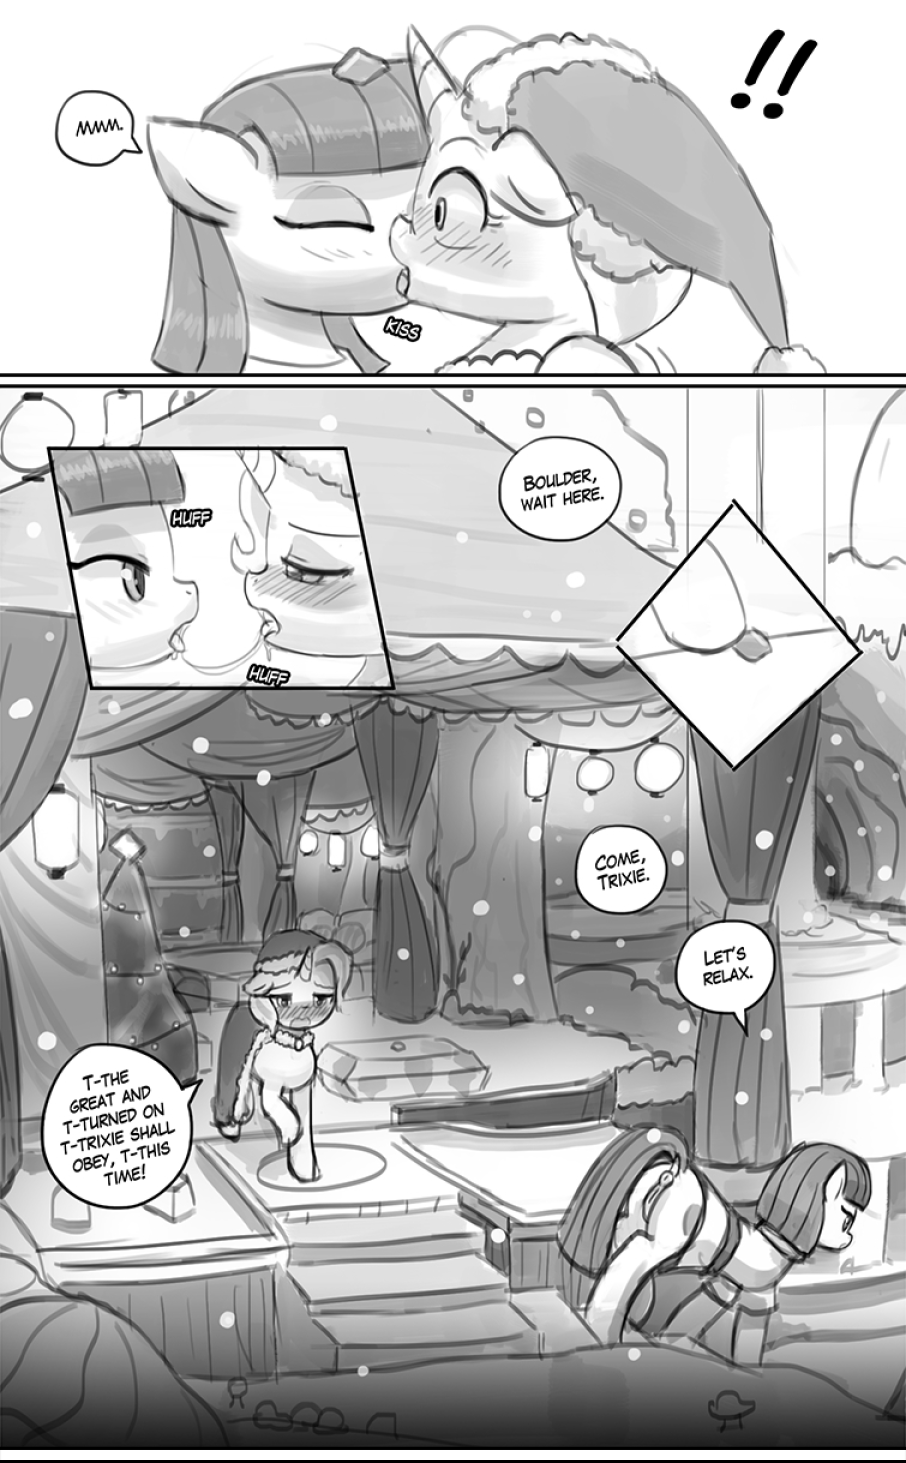 Homesick Part 2: Hearth's Warming Eve porn comic picture 9